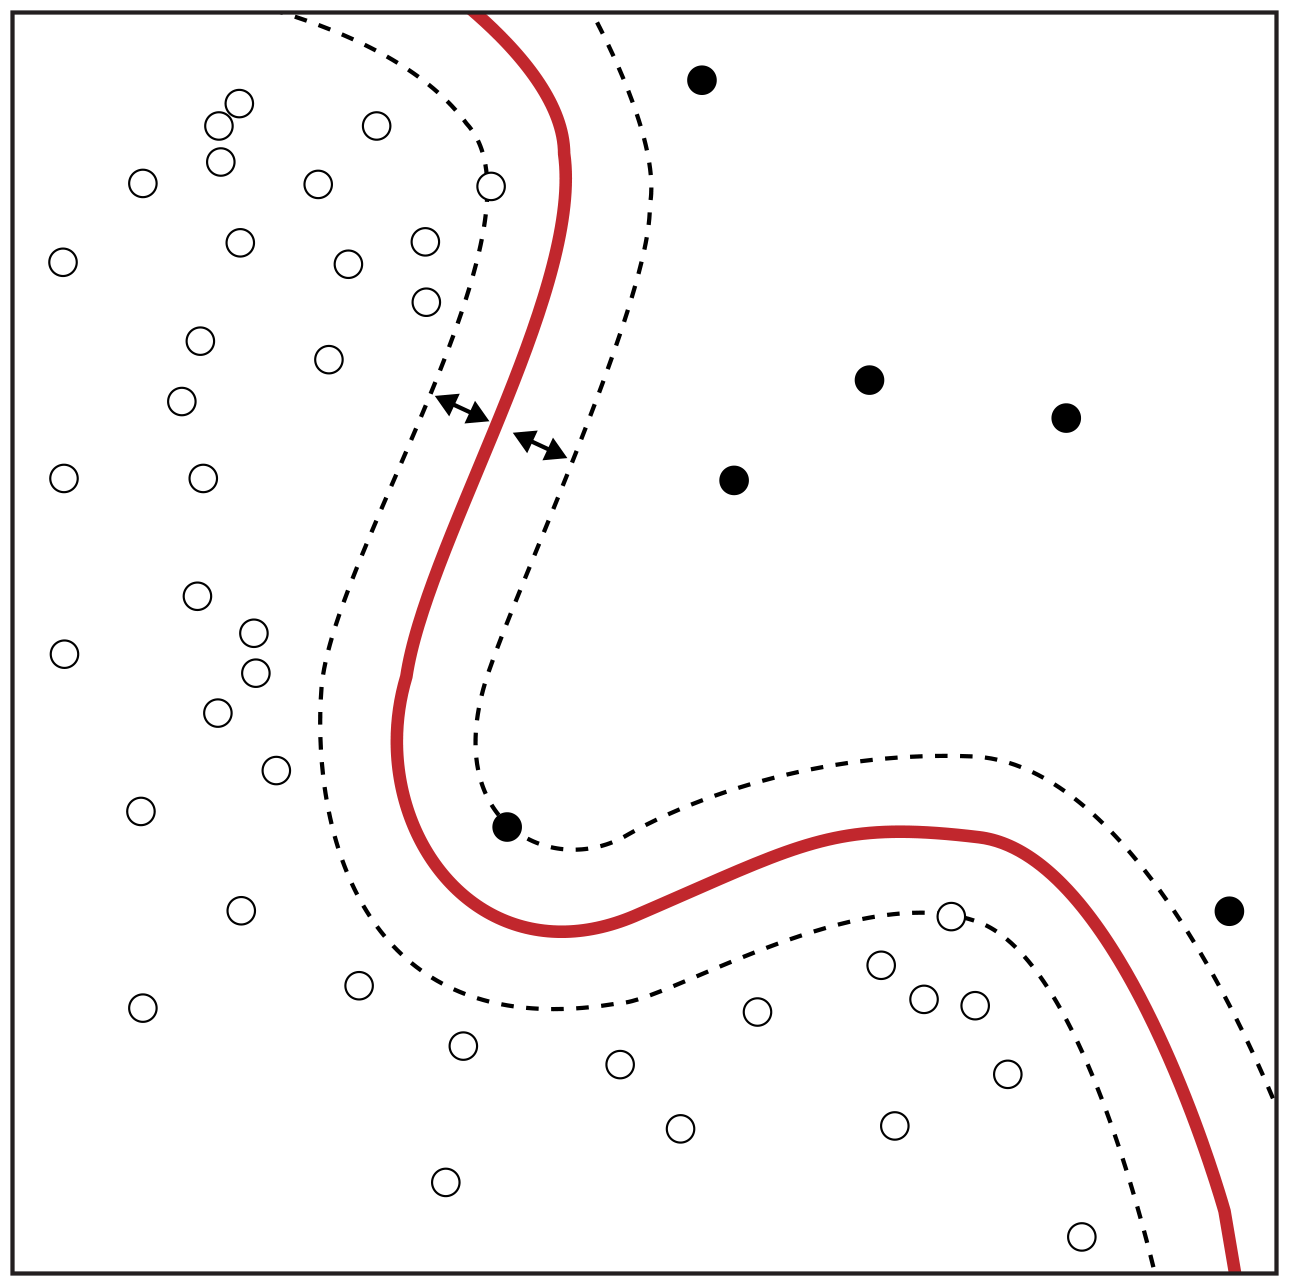 A two-dimensional feature representation of an SVM